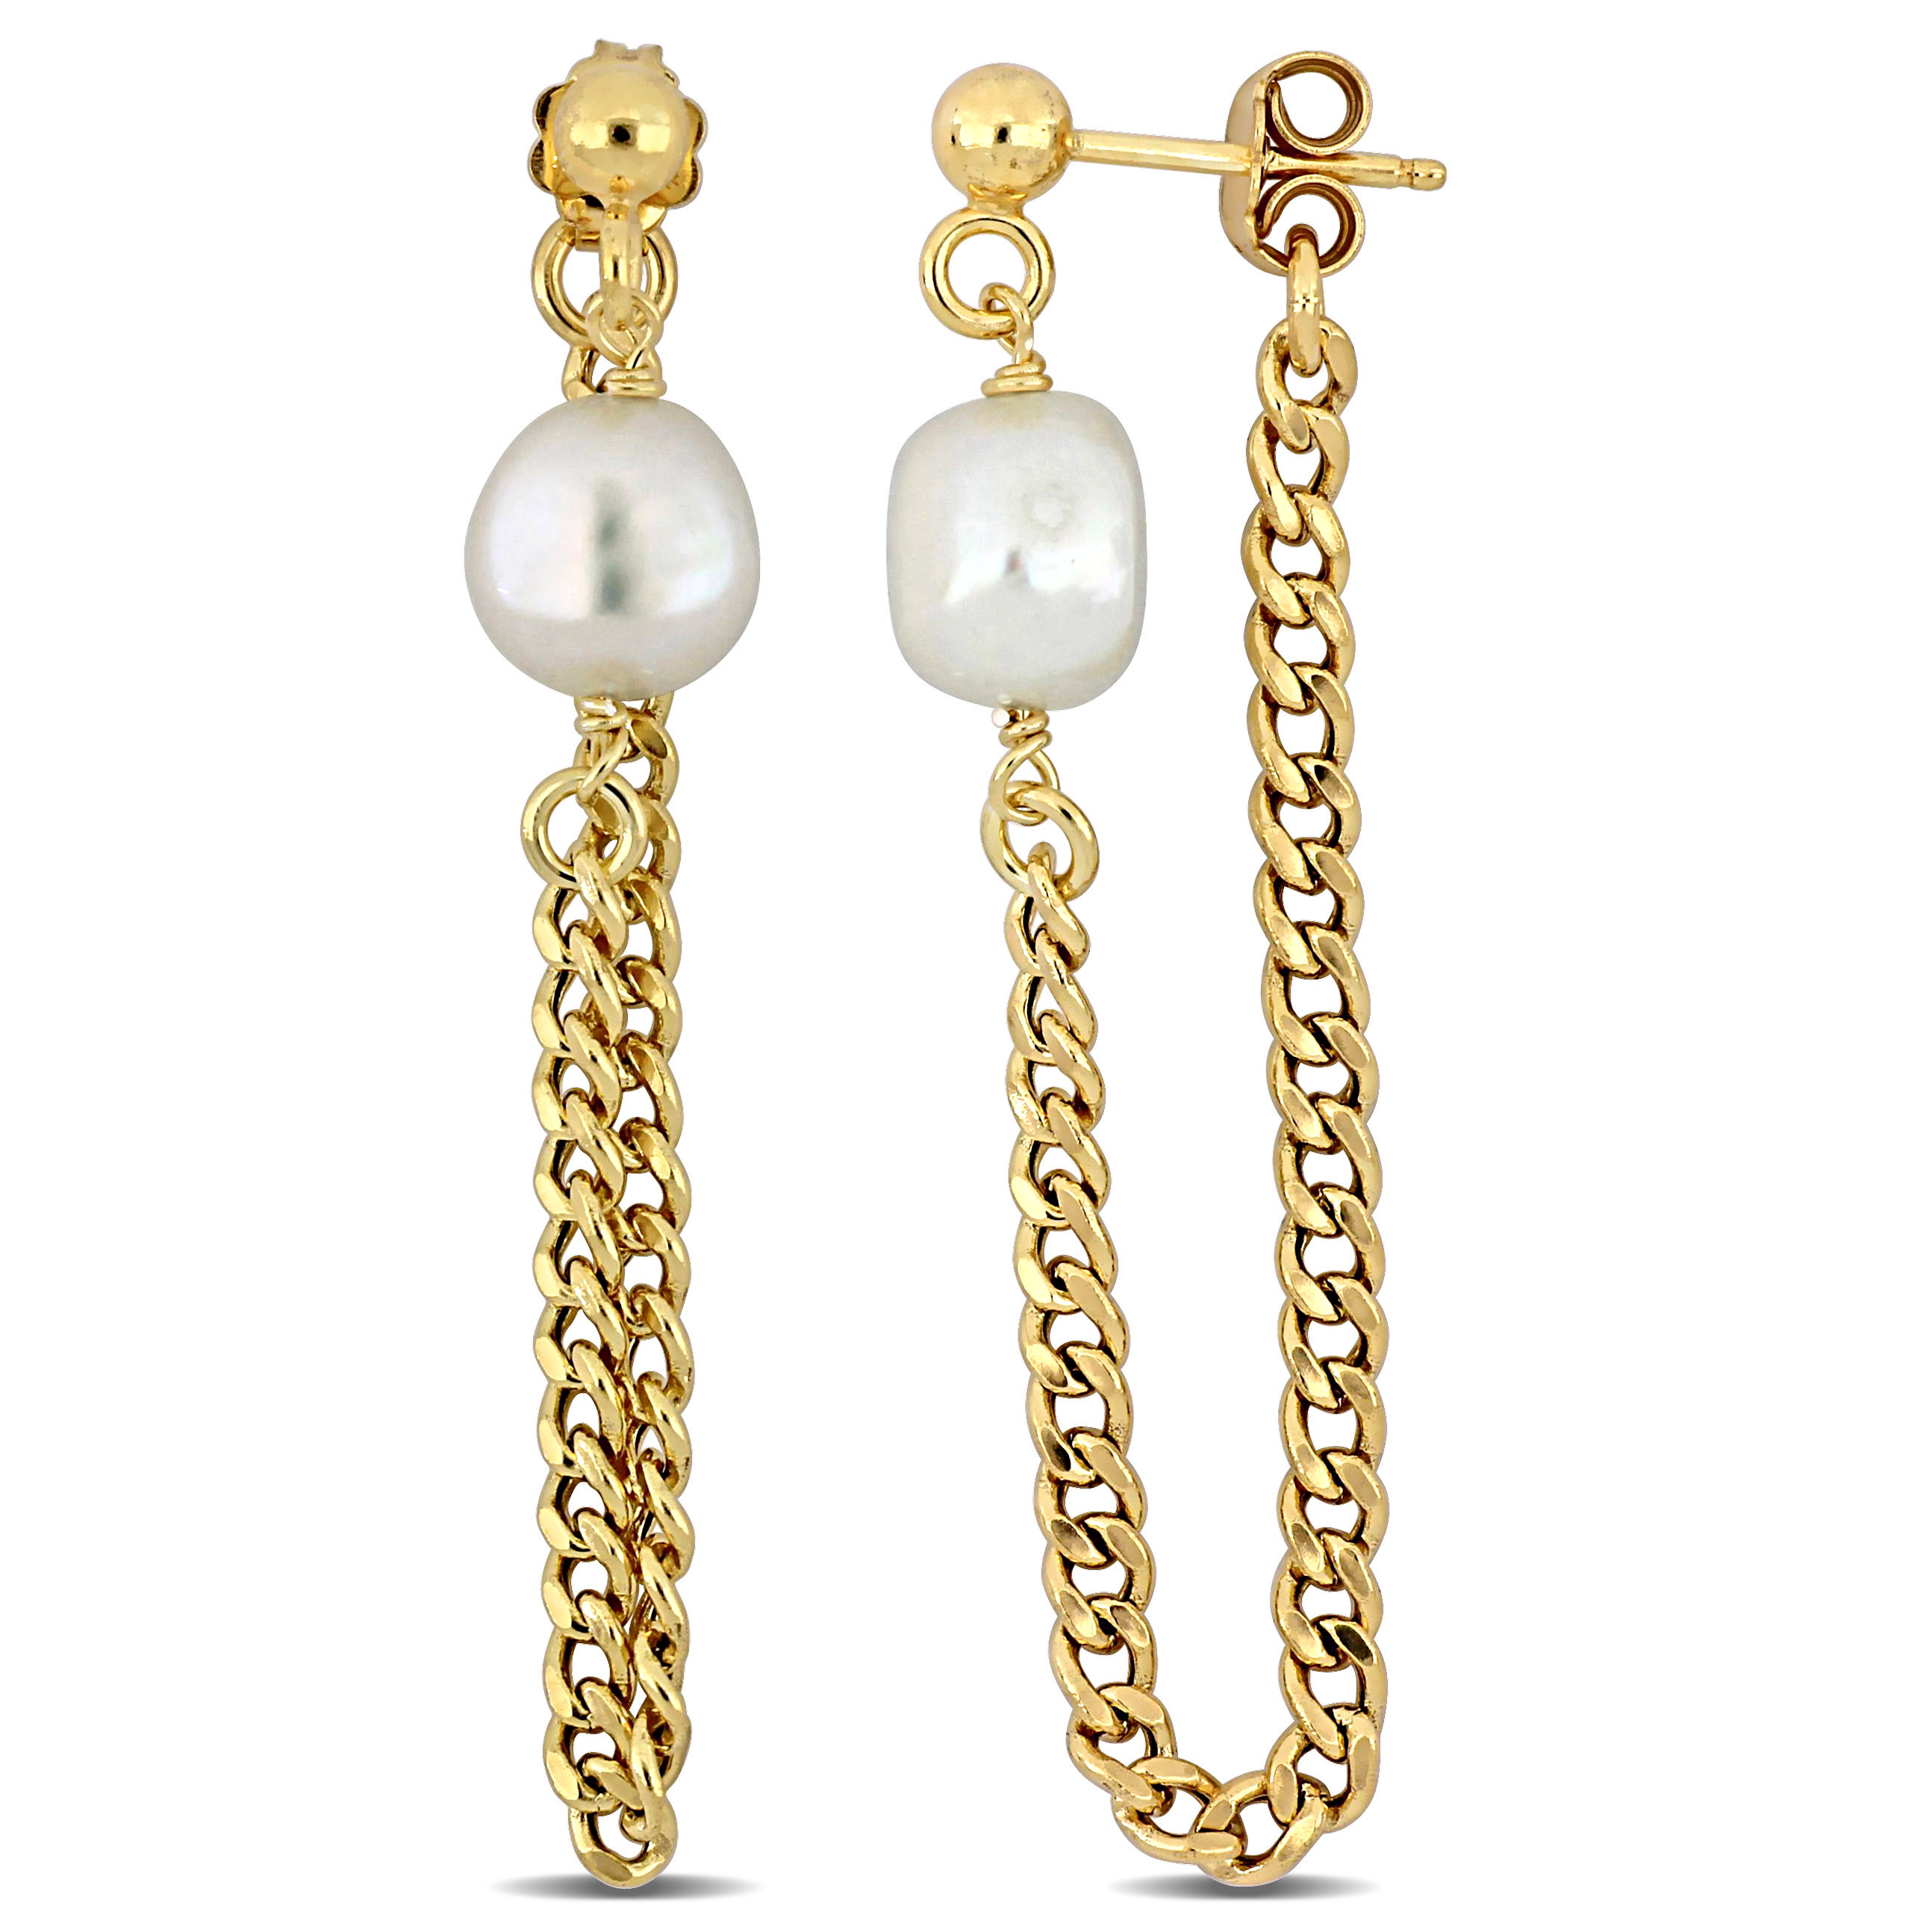 8-8.5 MM Cultured Freshwater Pearl Earrings with Curb Chain in Yellow Gold Plated Sterling Silver